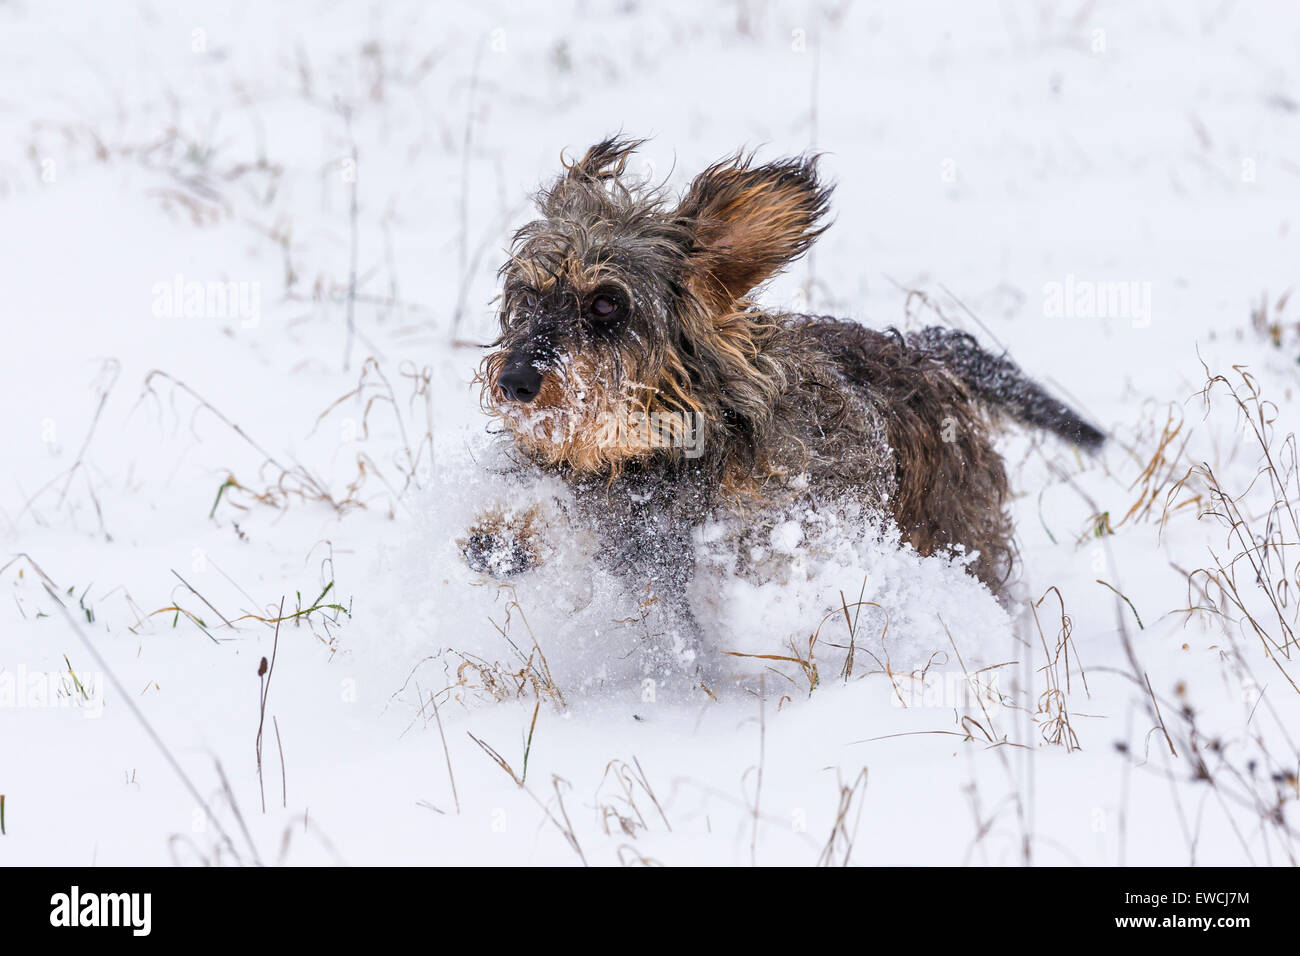 Wire-haired Dachshund. Adult running in snow. Germany Stock Photo